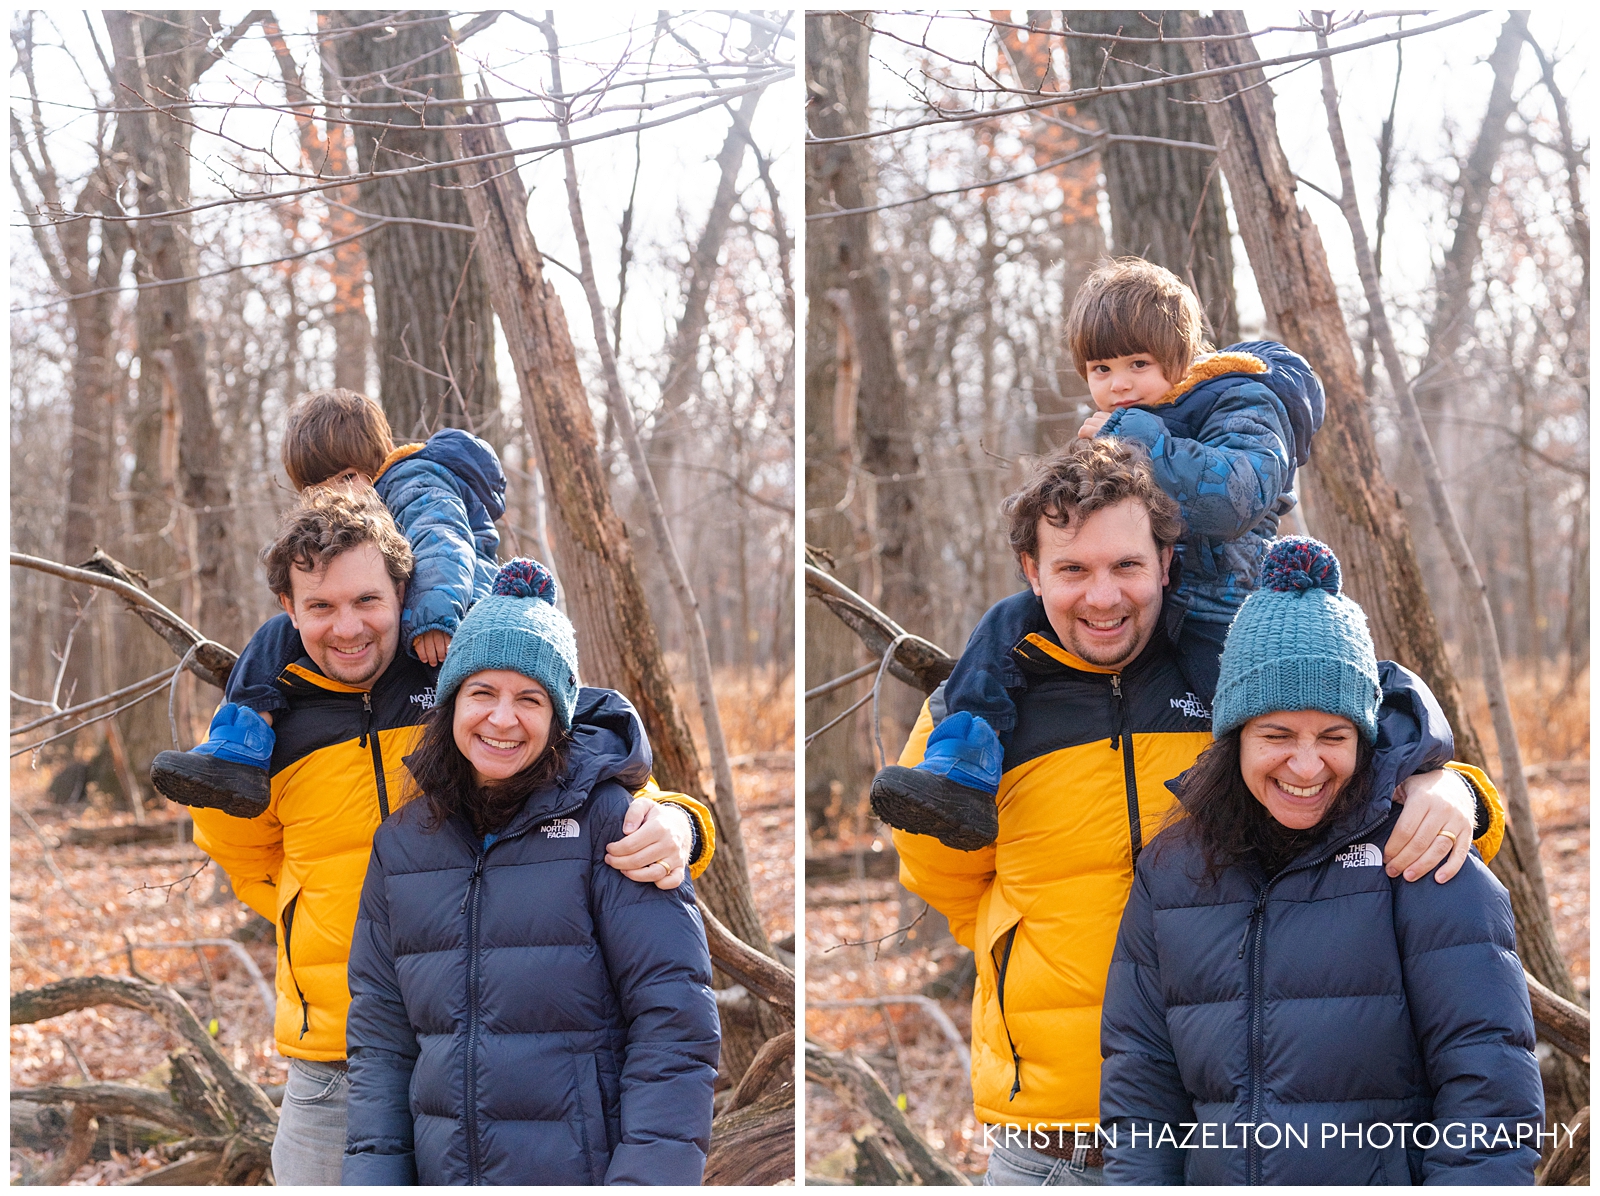 Family portrait of three in the woods - a little boy is playing peekaboo behind dad's head